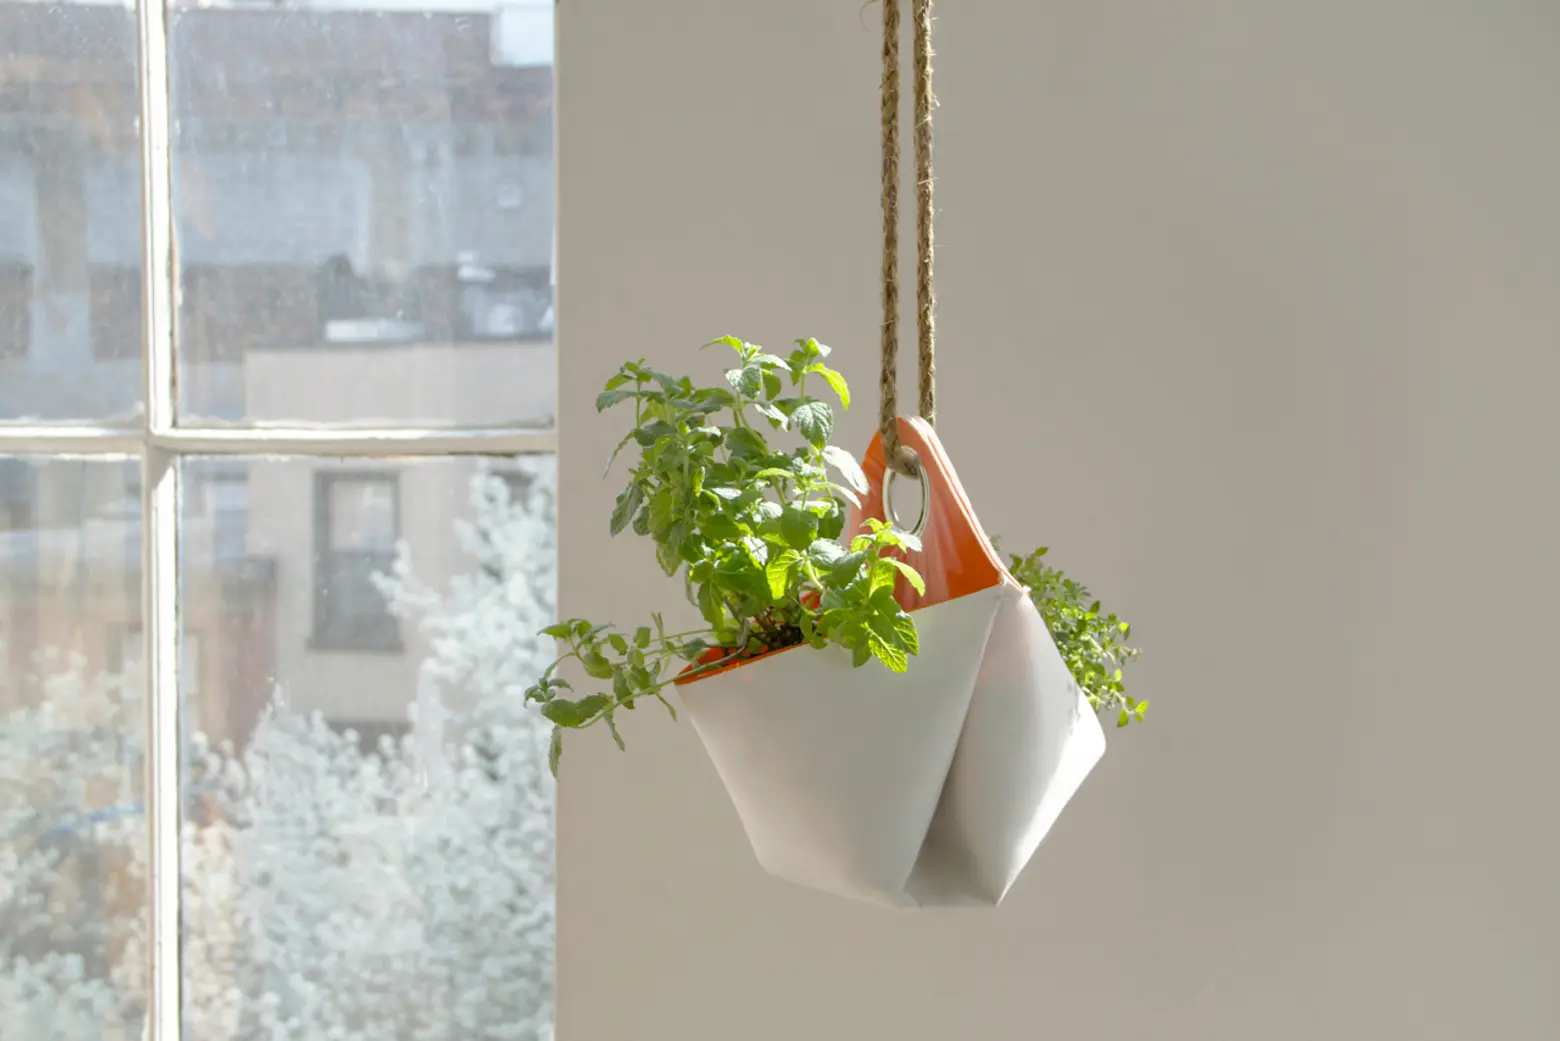 Nomad Is a Portable Herb Planter Perfect for City Living